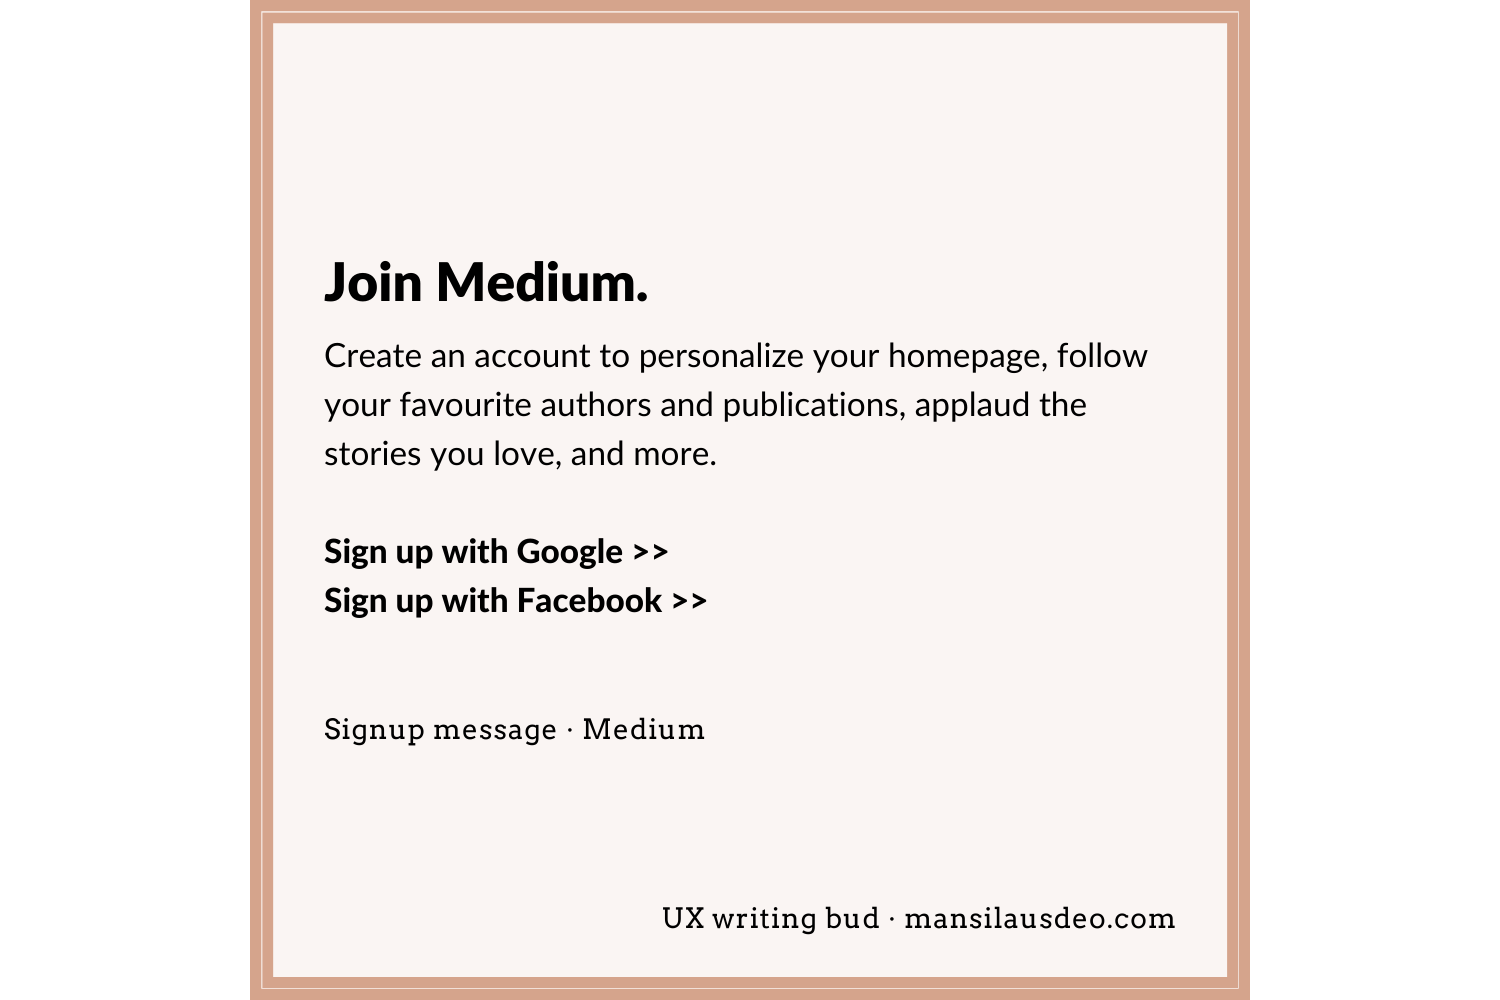 Join Medium. Create an account to personalize your homepage, follow your favourite authors and publications, applaud the stories you love, and more. Sign up with Google >> Sign up with Facebook >> Signup form • Medium UX writing bud